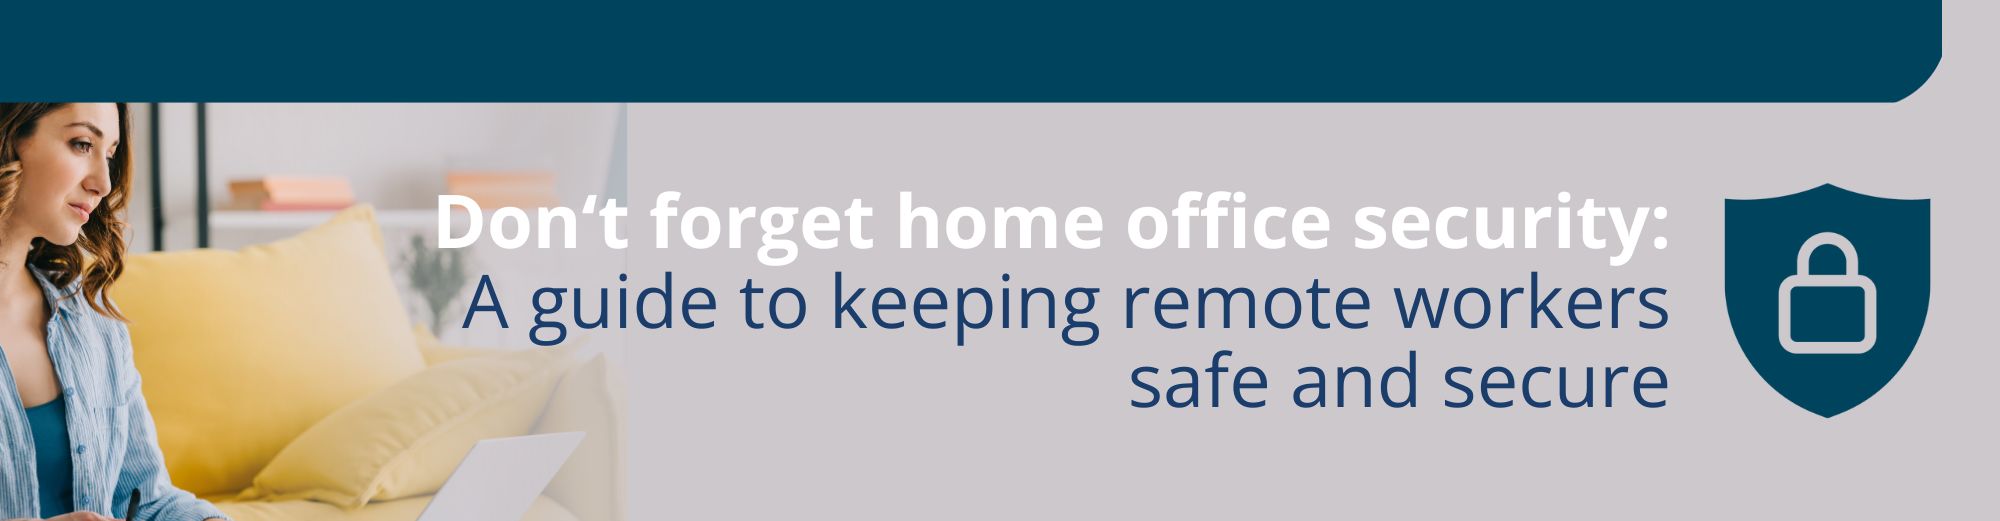 Guide to home office security - download now!